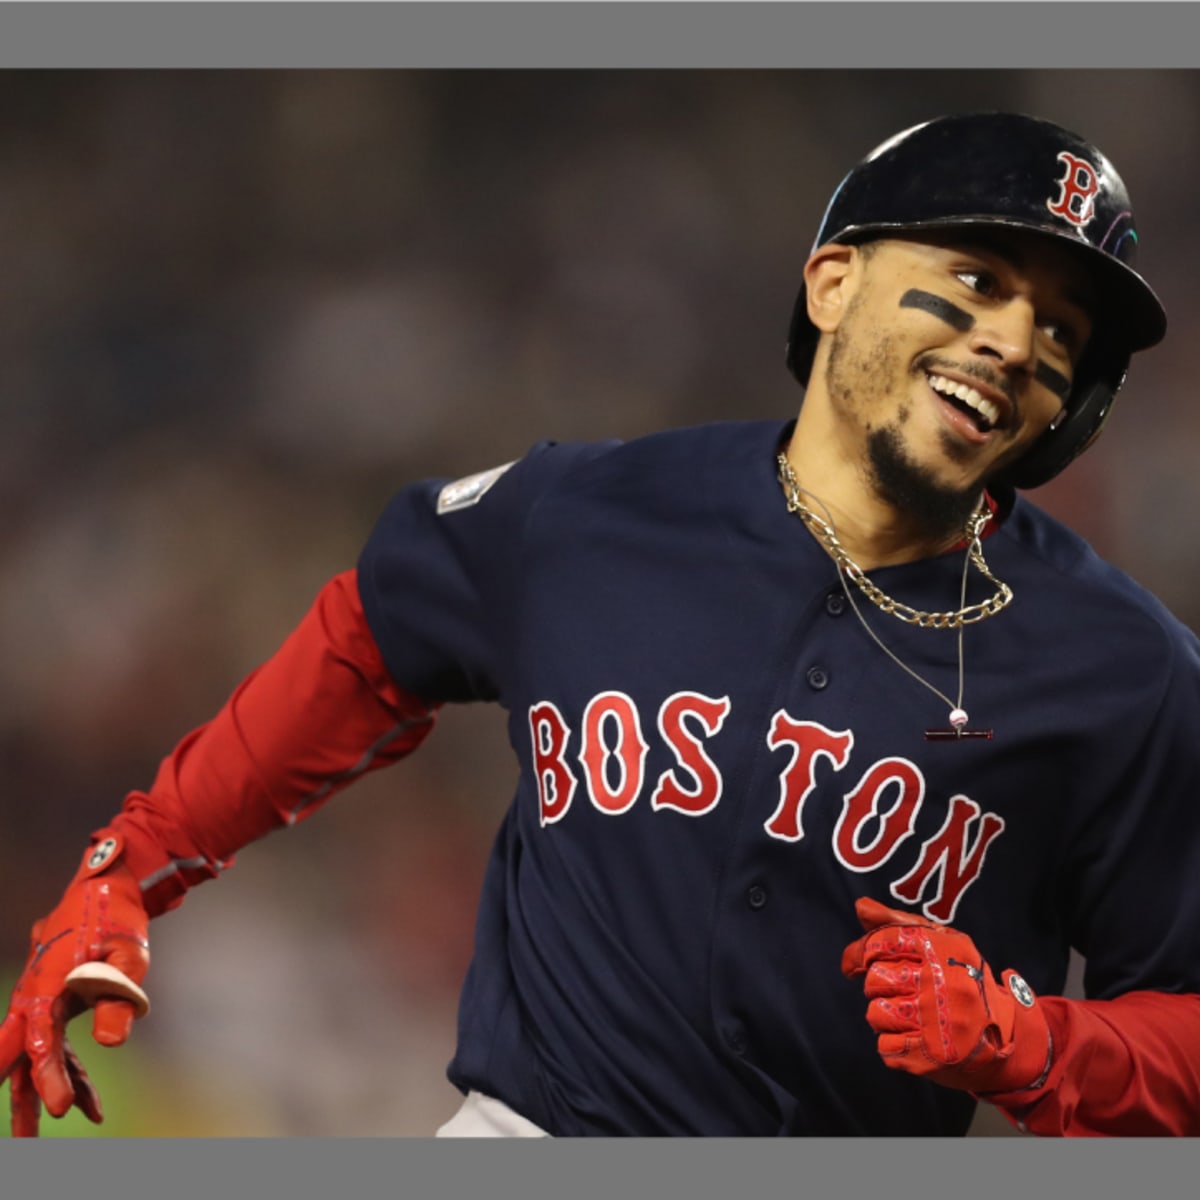 mookie betts red sox 2018